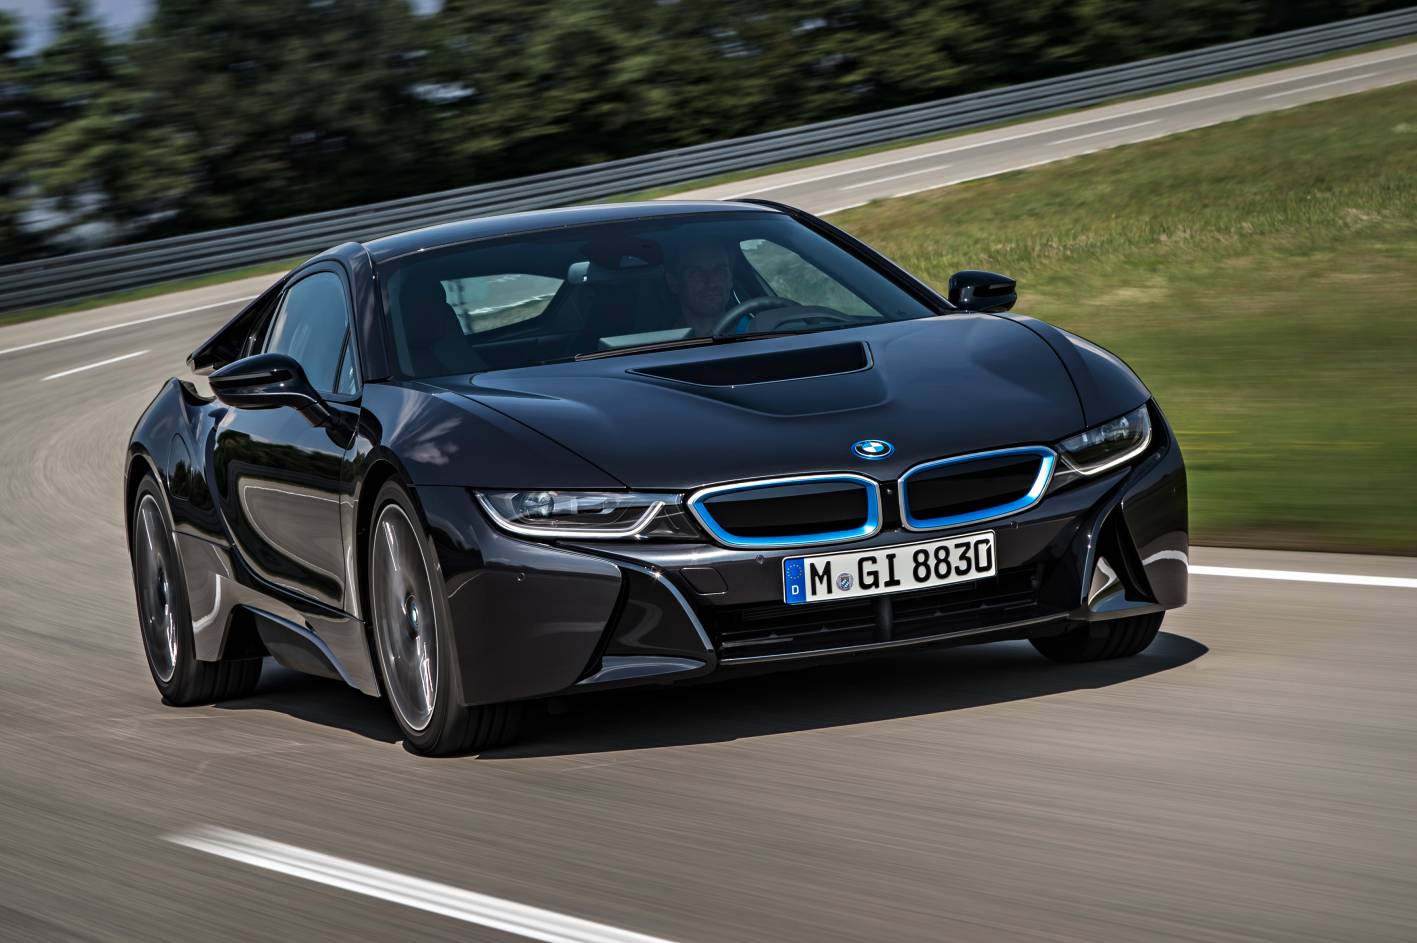 BMW i8 deliveries start in June, final specs announced - PerformanceDrive